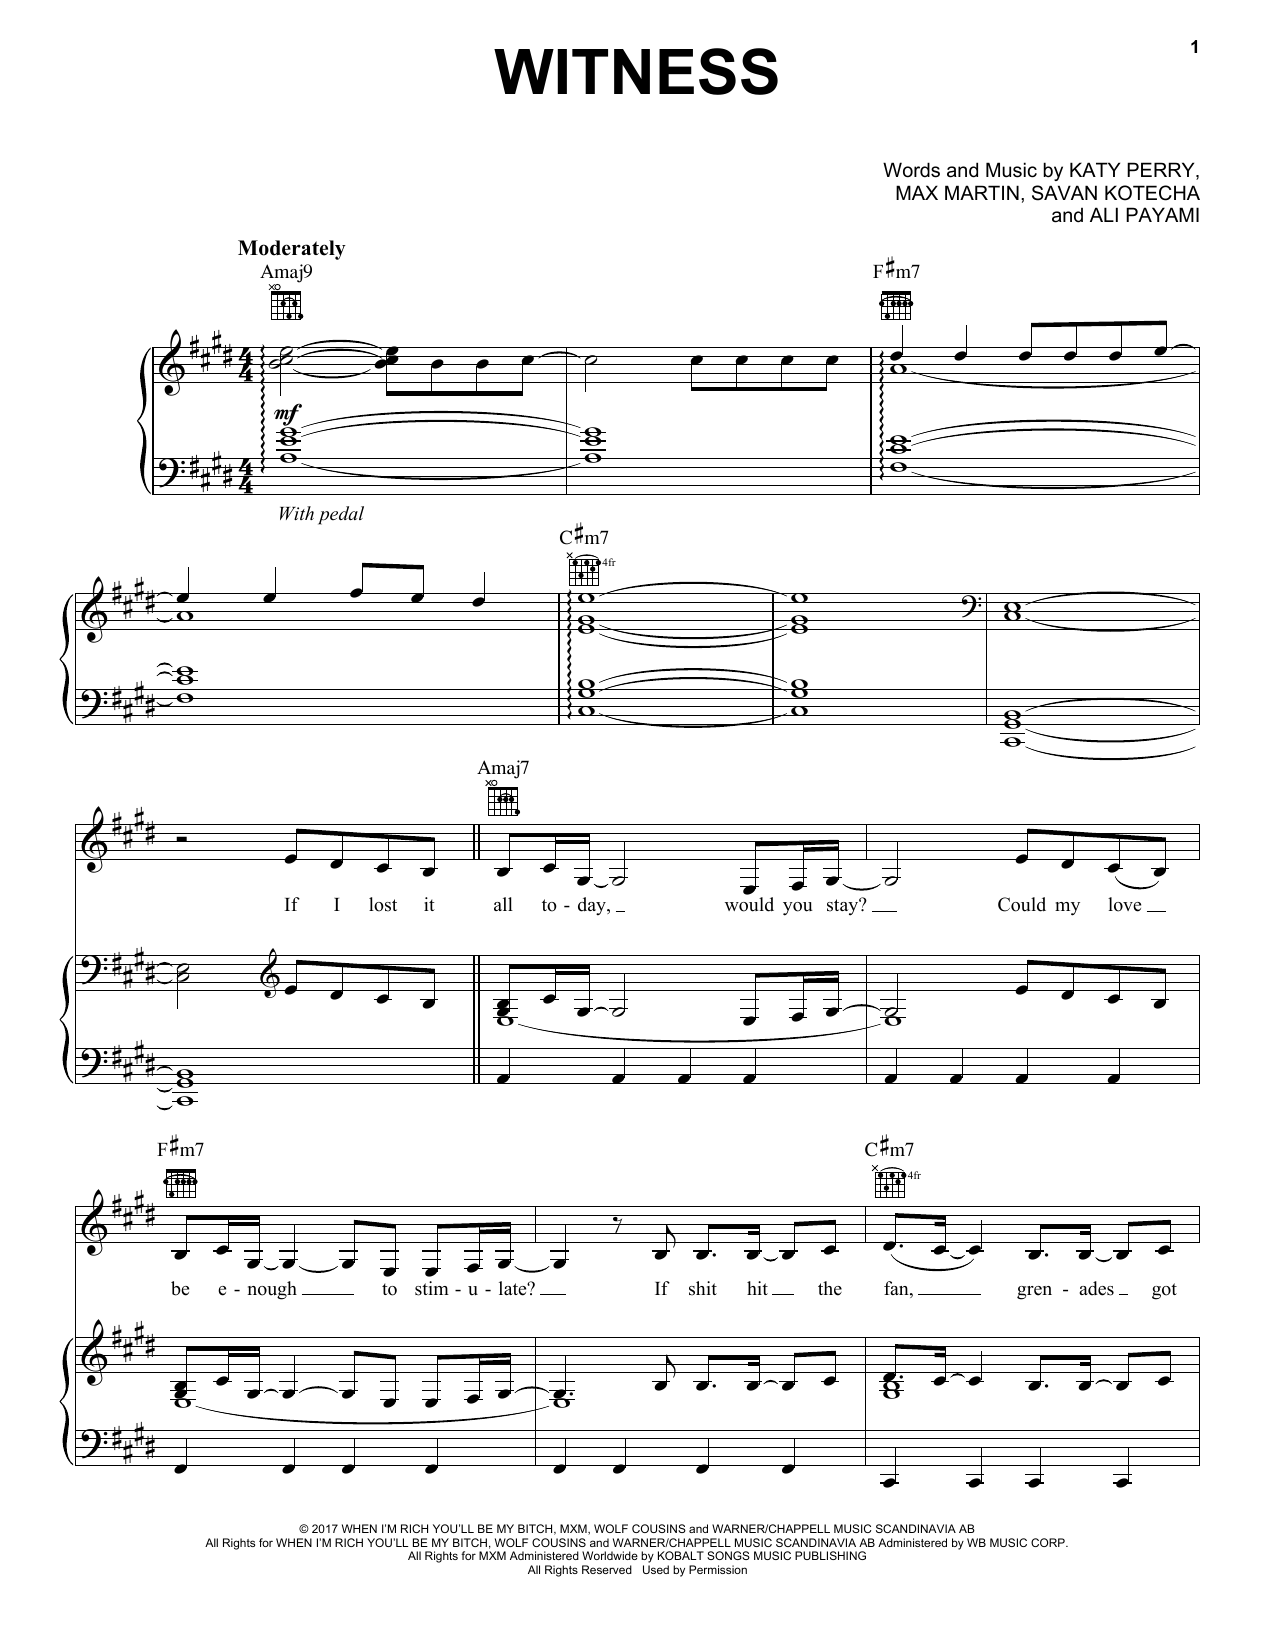 Download Katy Perry Witness Sheet Music